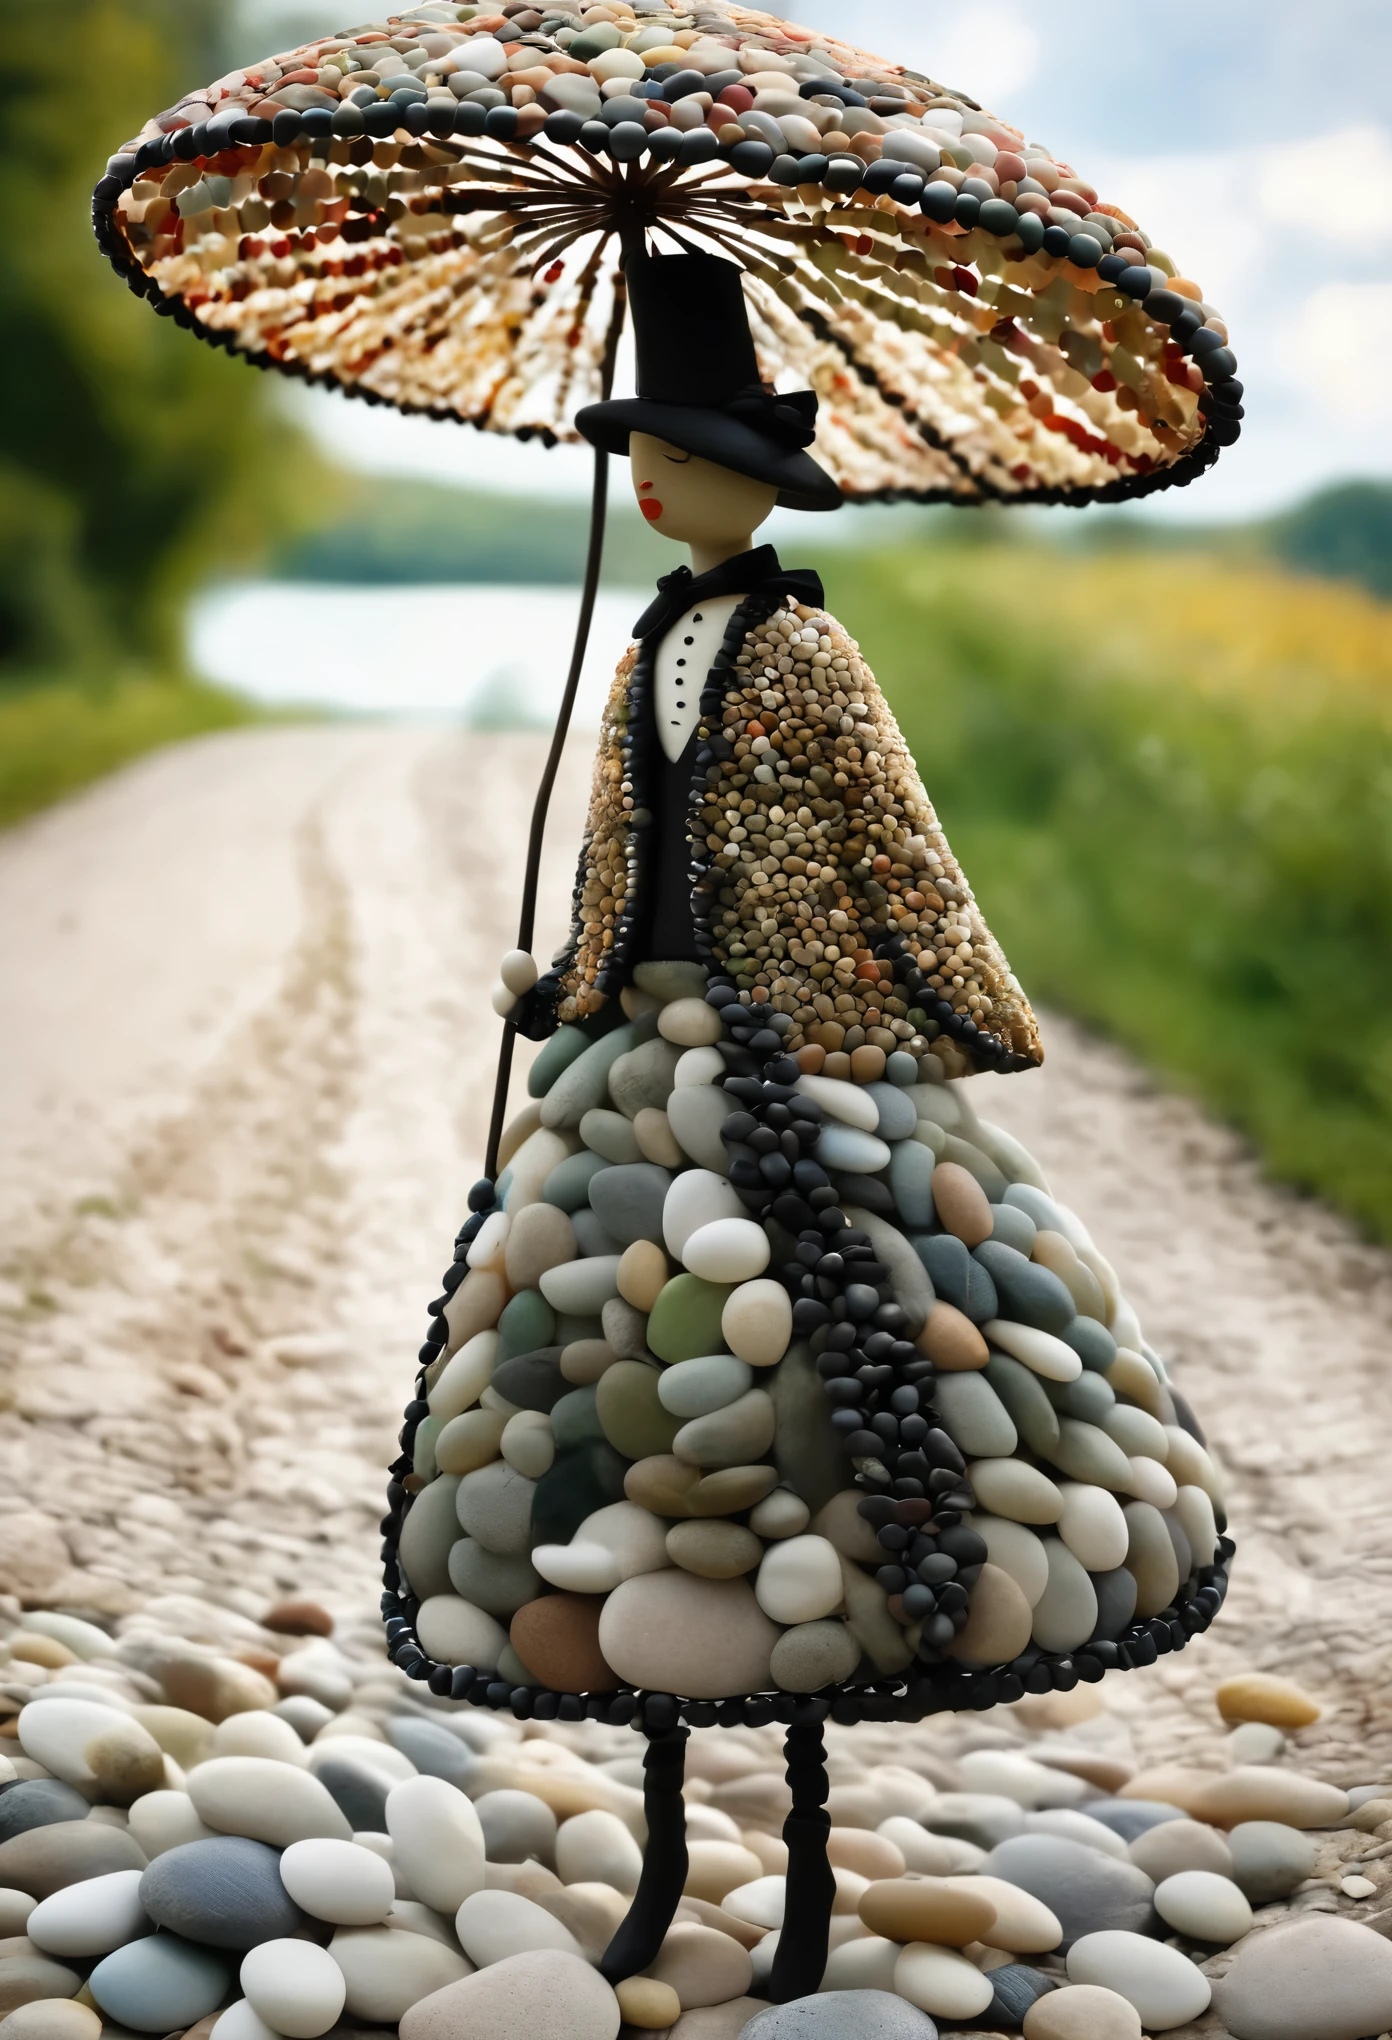 A whimsical character made out of smooth river pebbles. Dressed elegantly. Holding a parasol. Strolling on a country road. Inspired by Katia Chausheva's viennese actionism